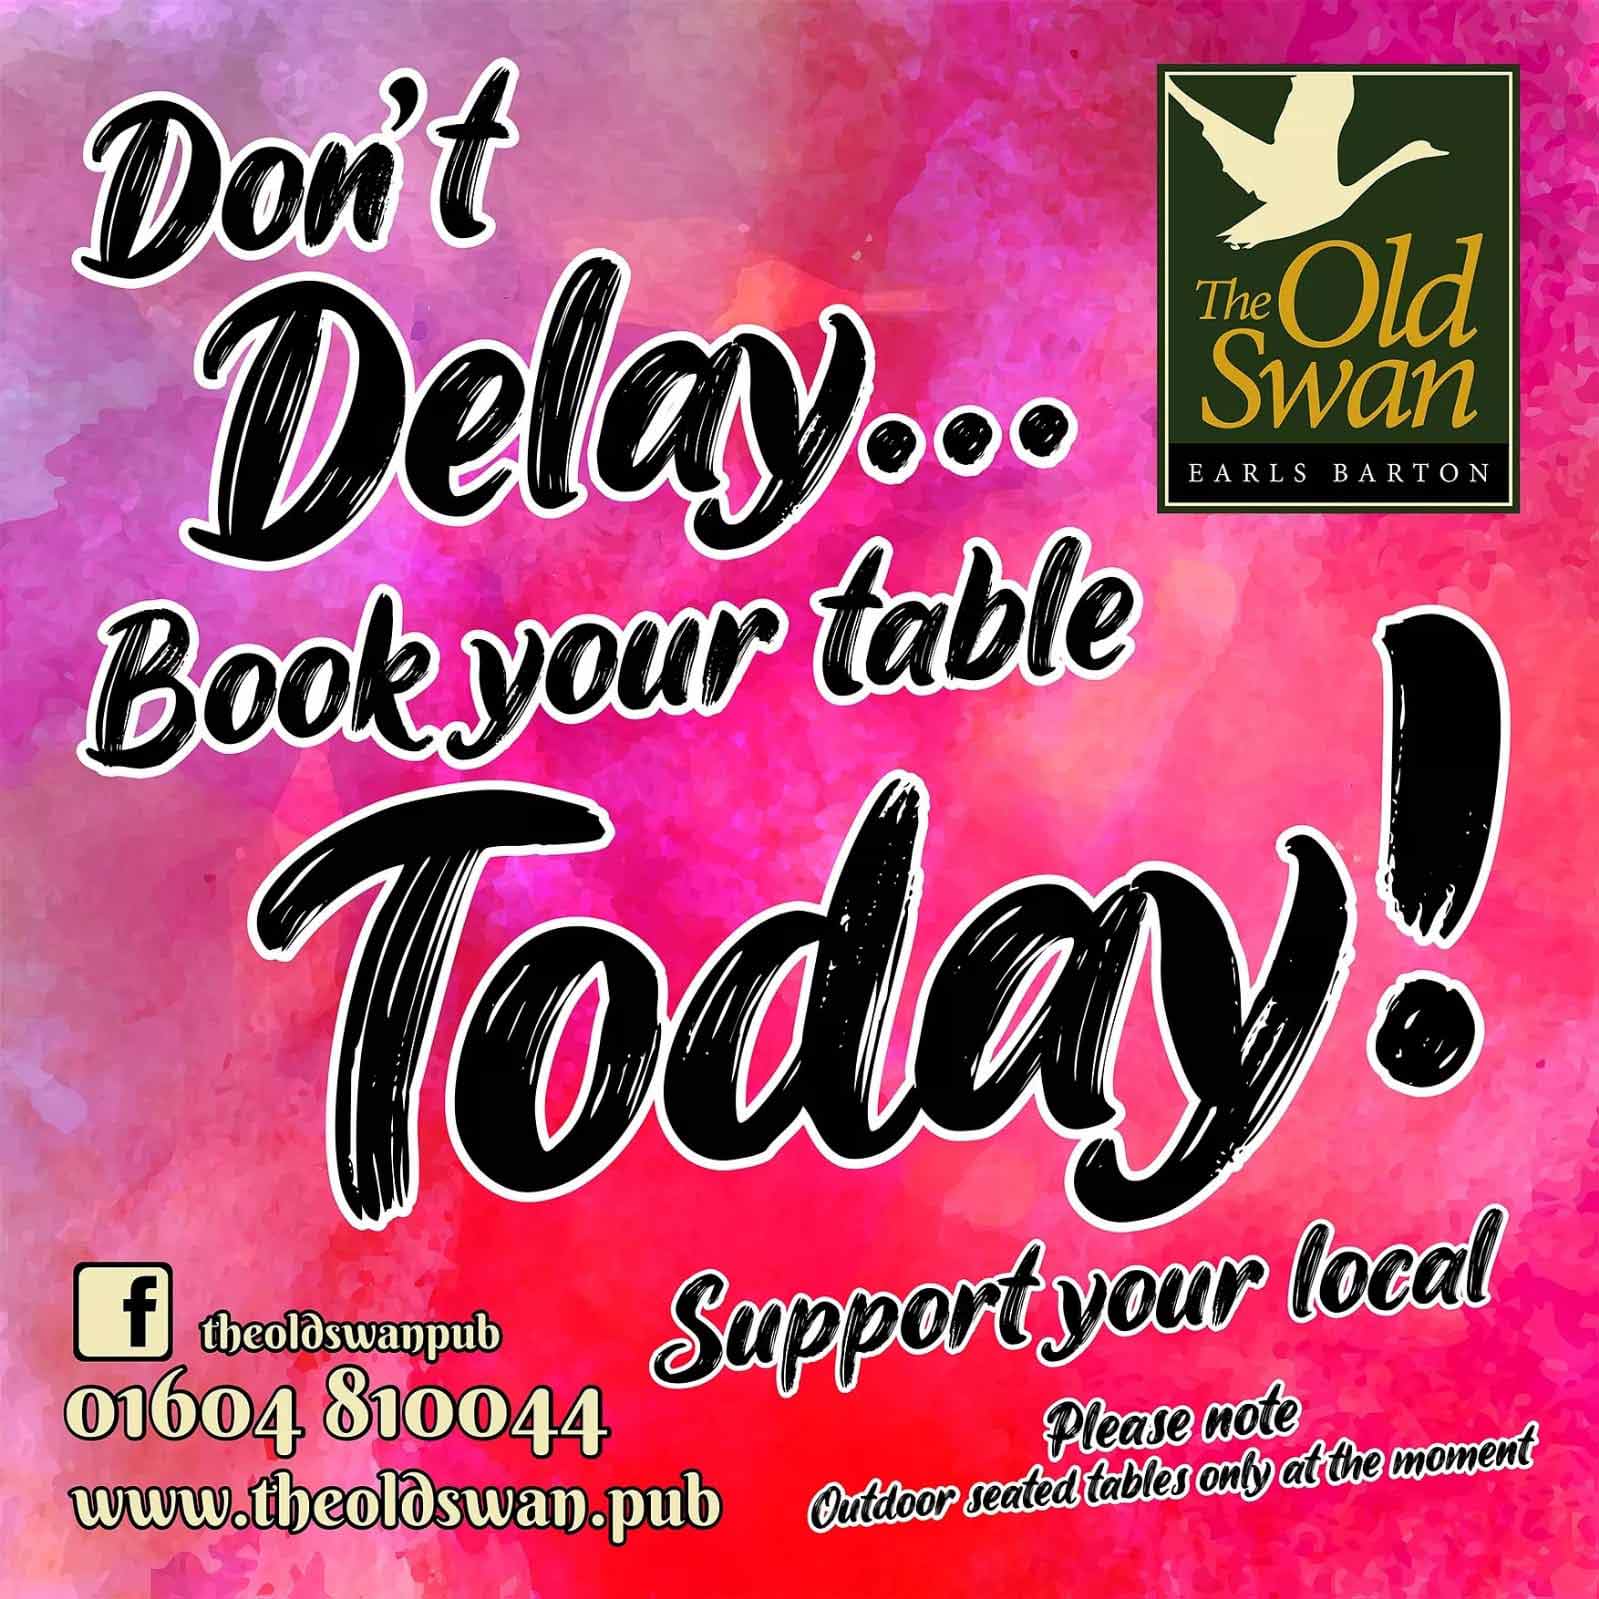 Don't delay - book today